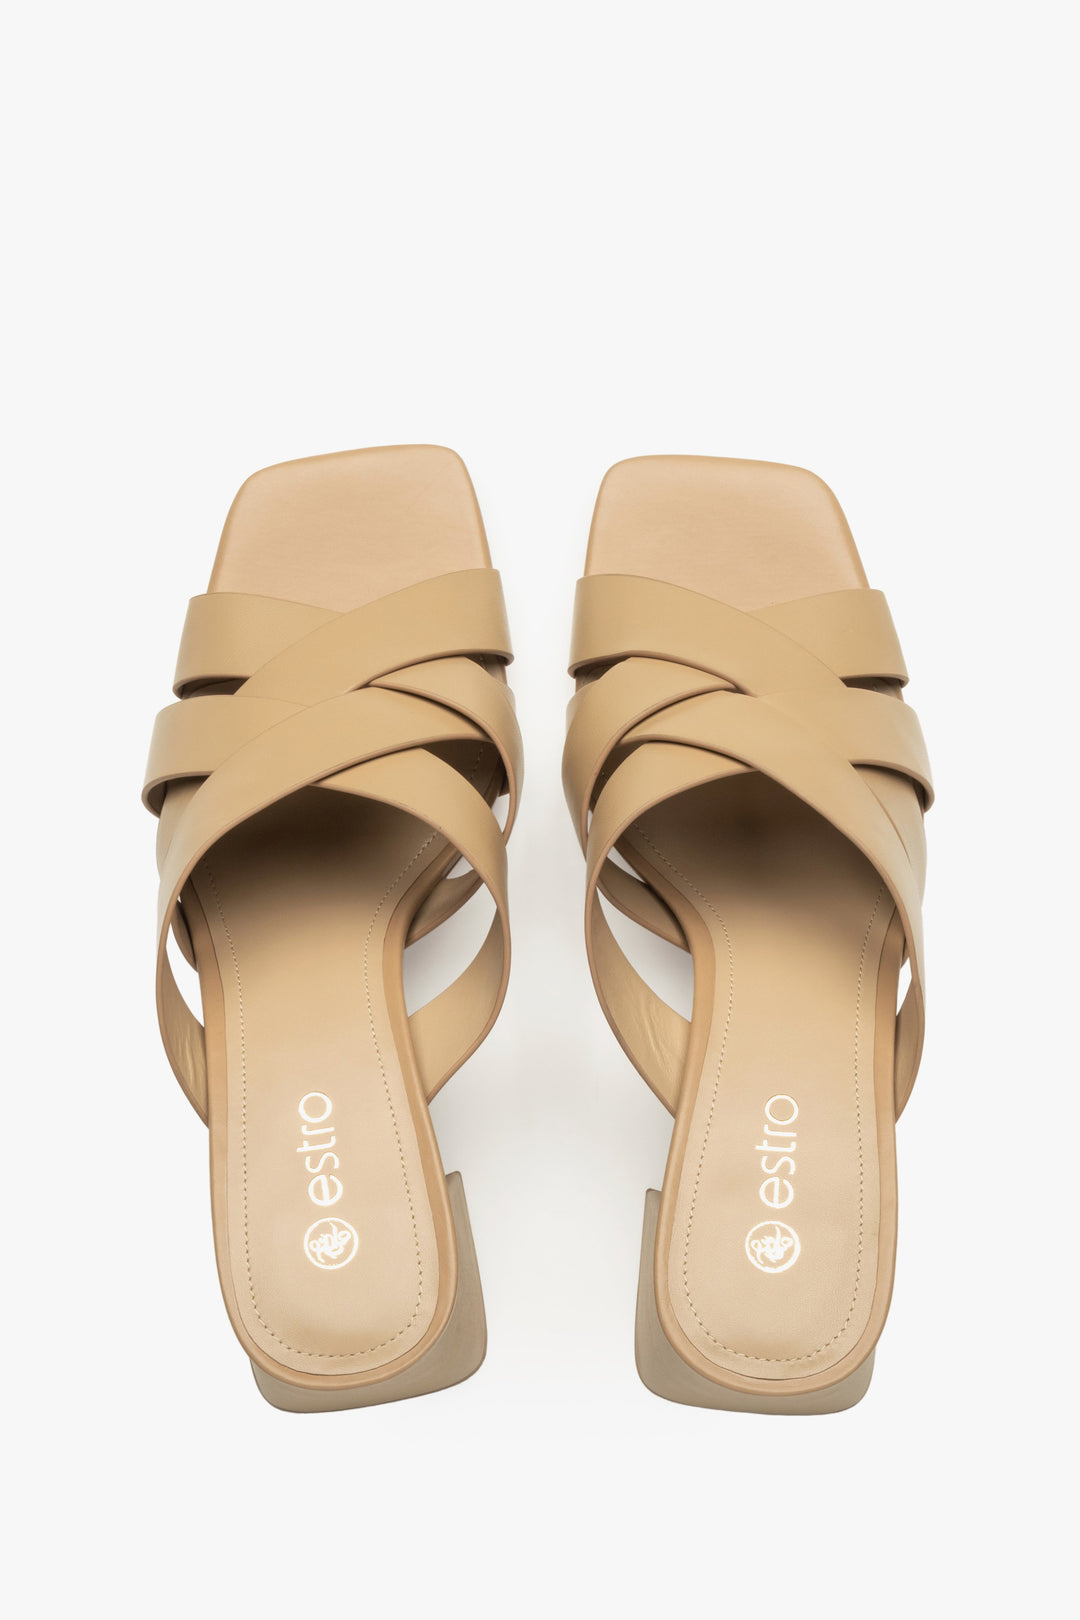 Women's sandals with a block heel made of genuine leather in beige color - top view presentation of the model.